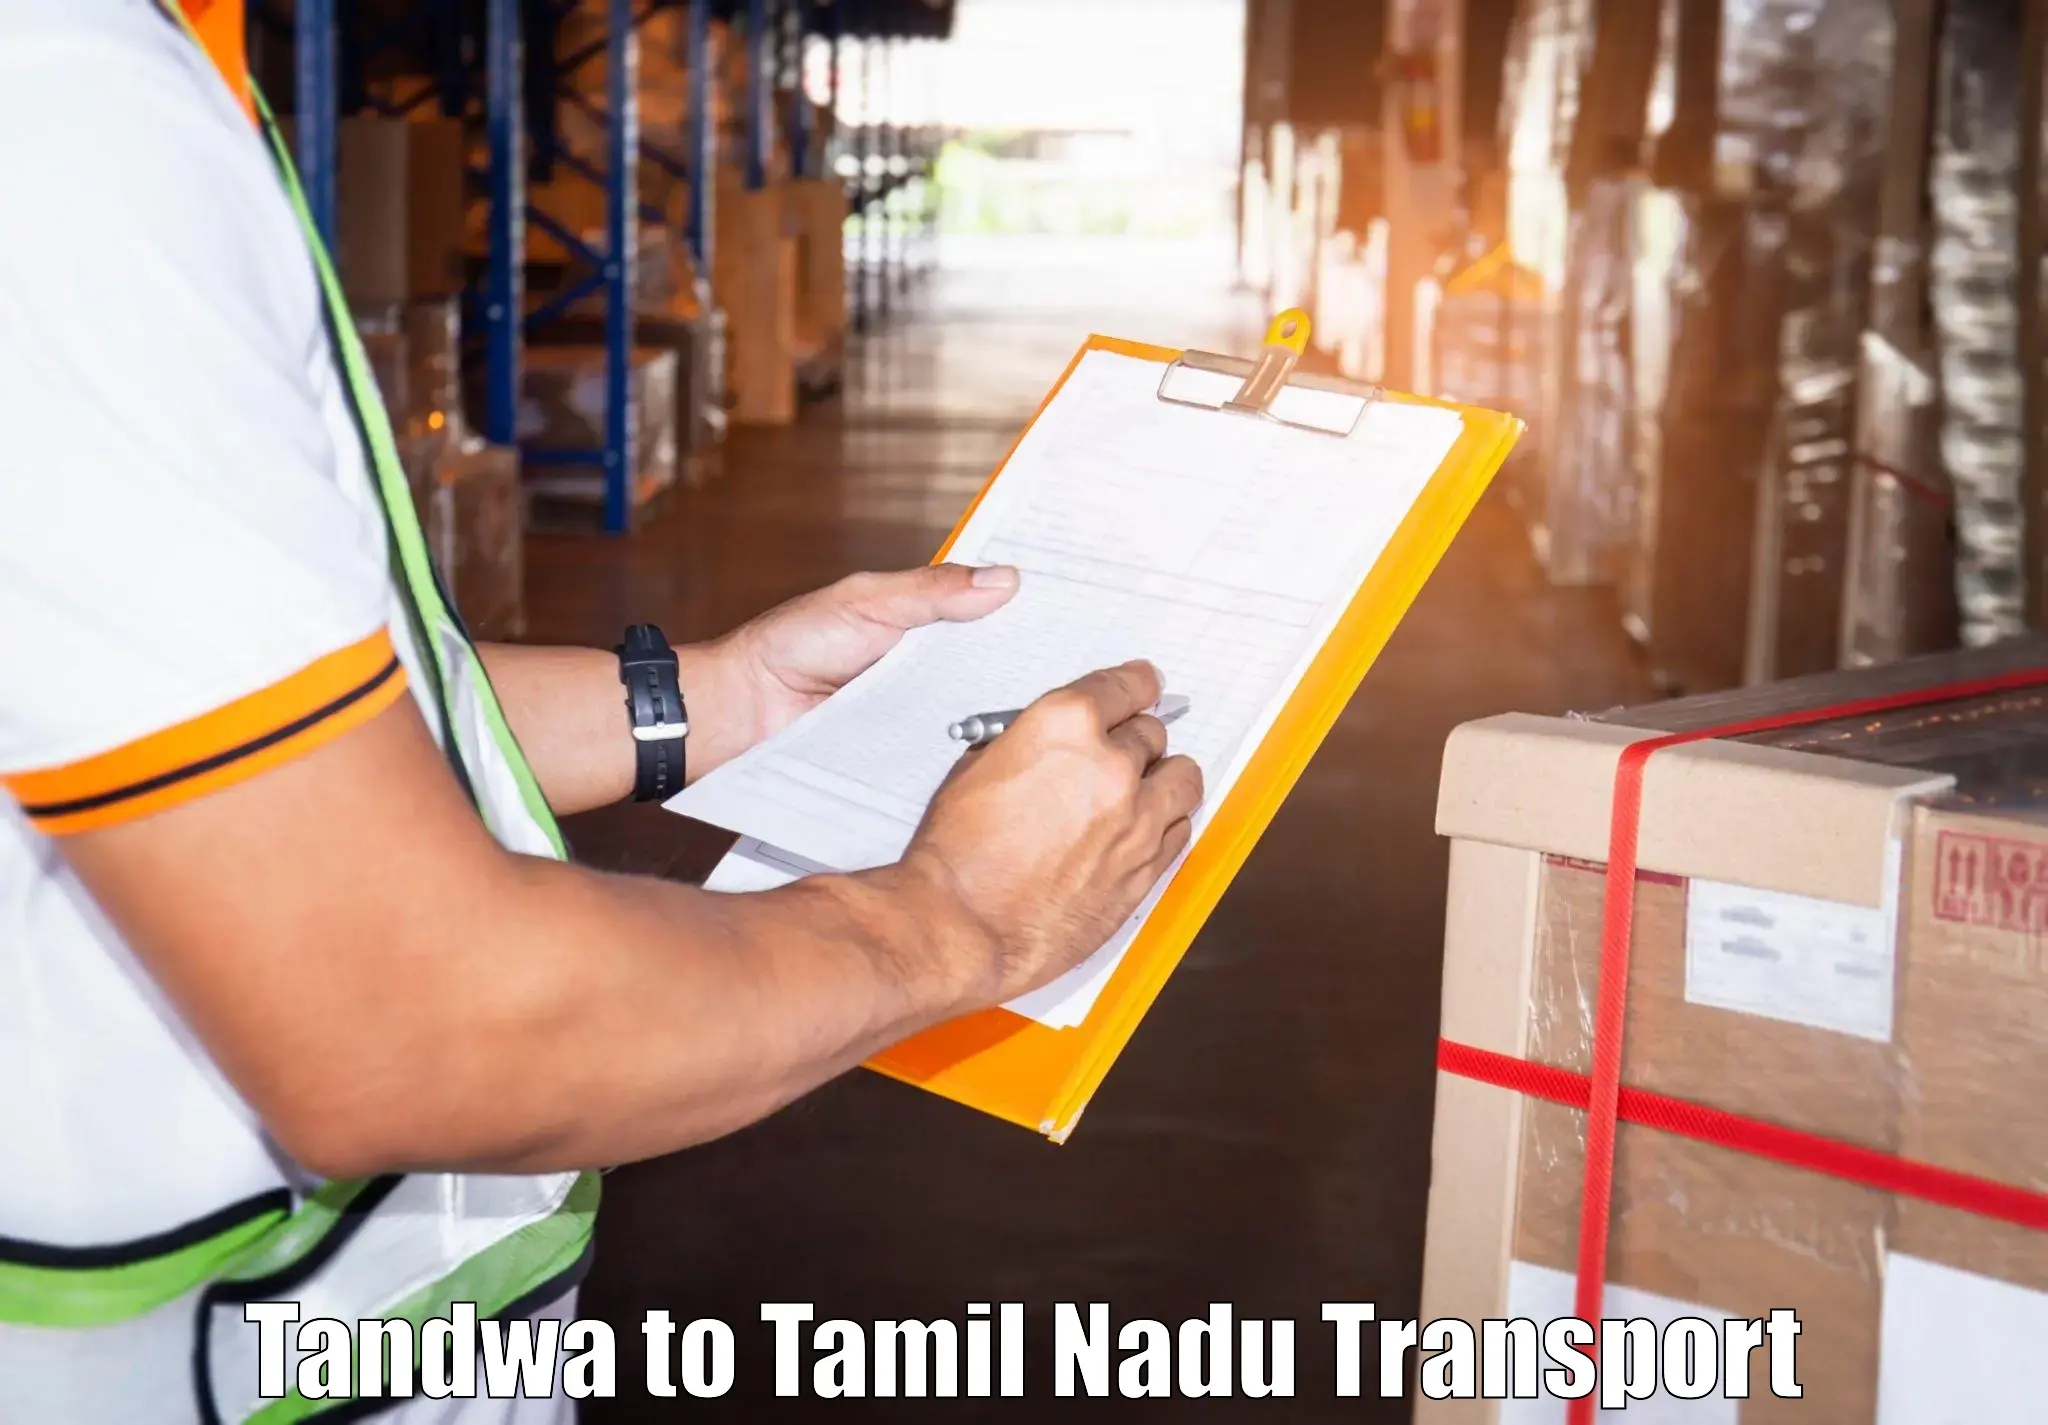 Commercial transport service Tandwa to Tamil Nadu